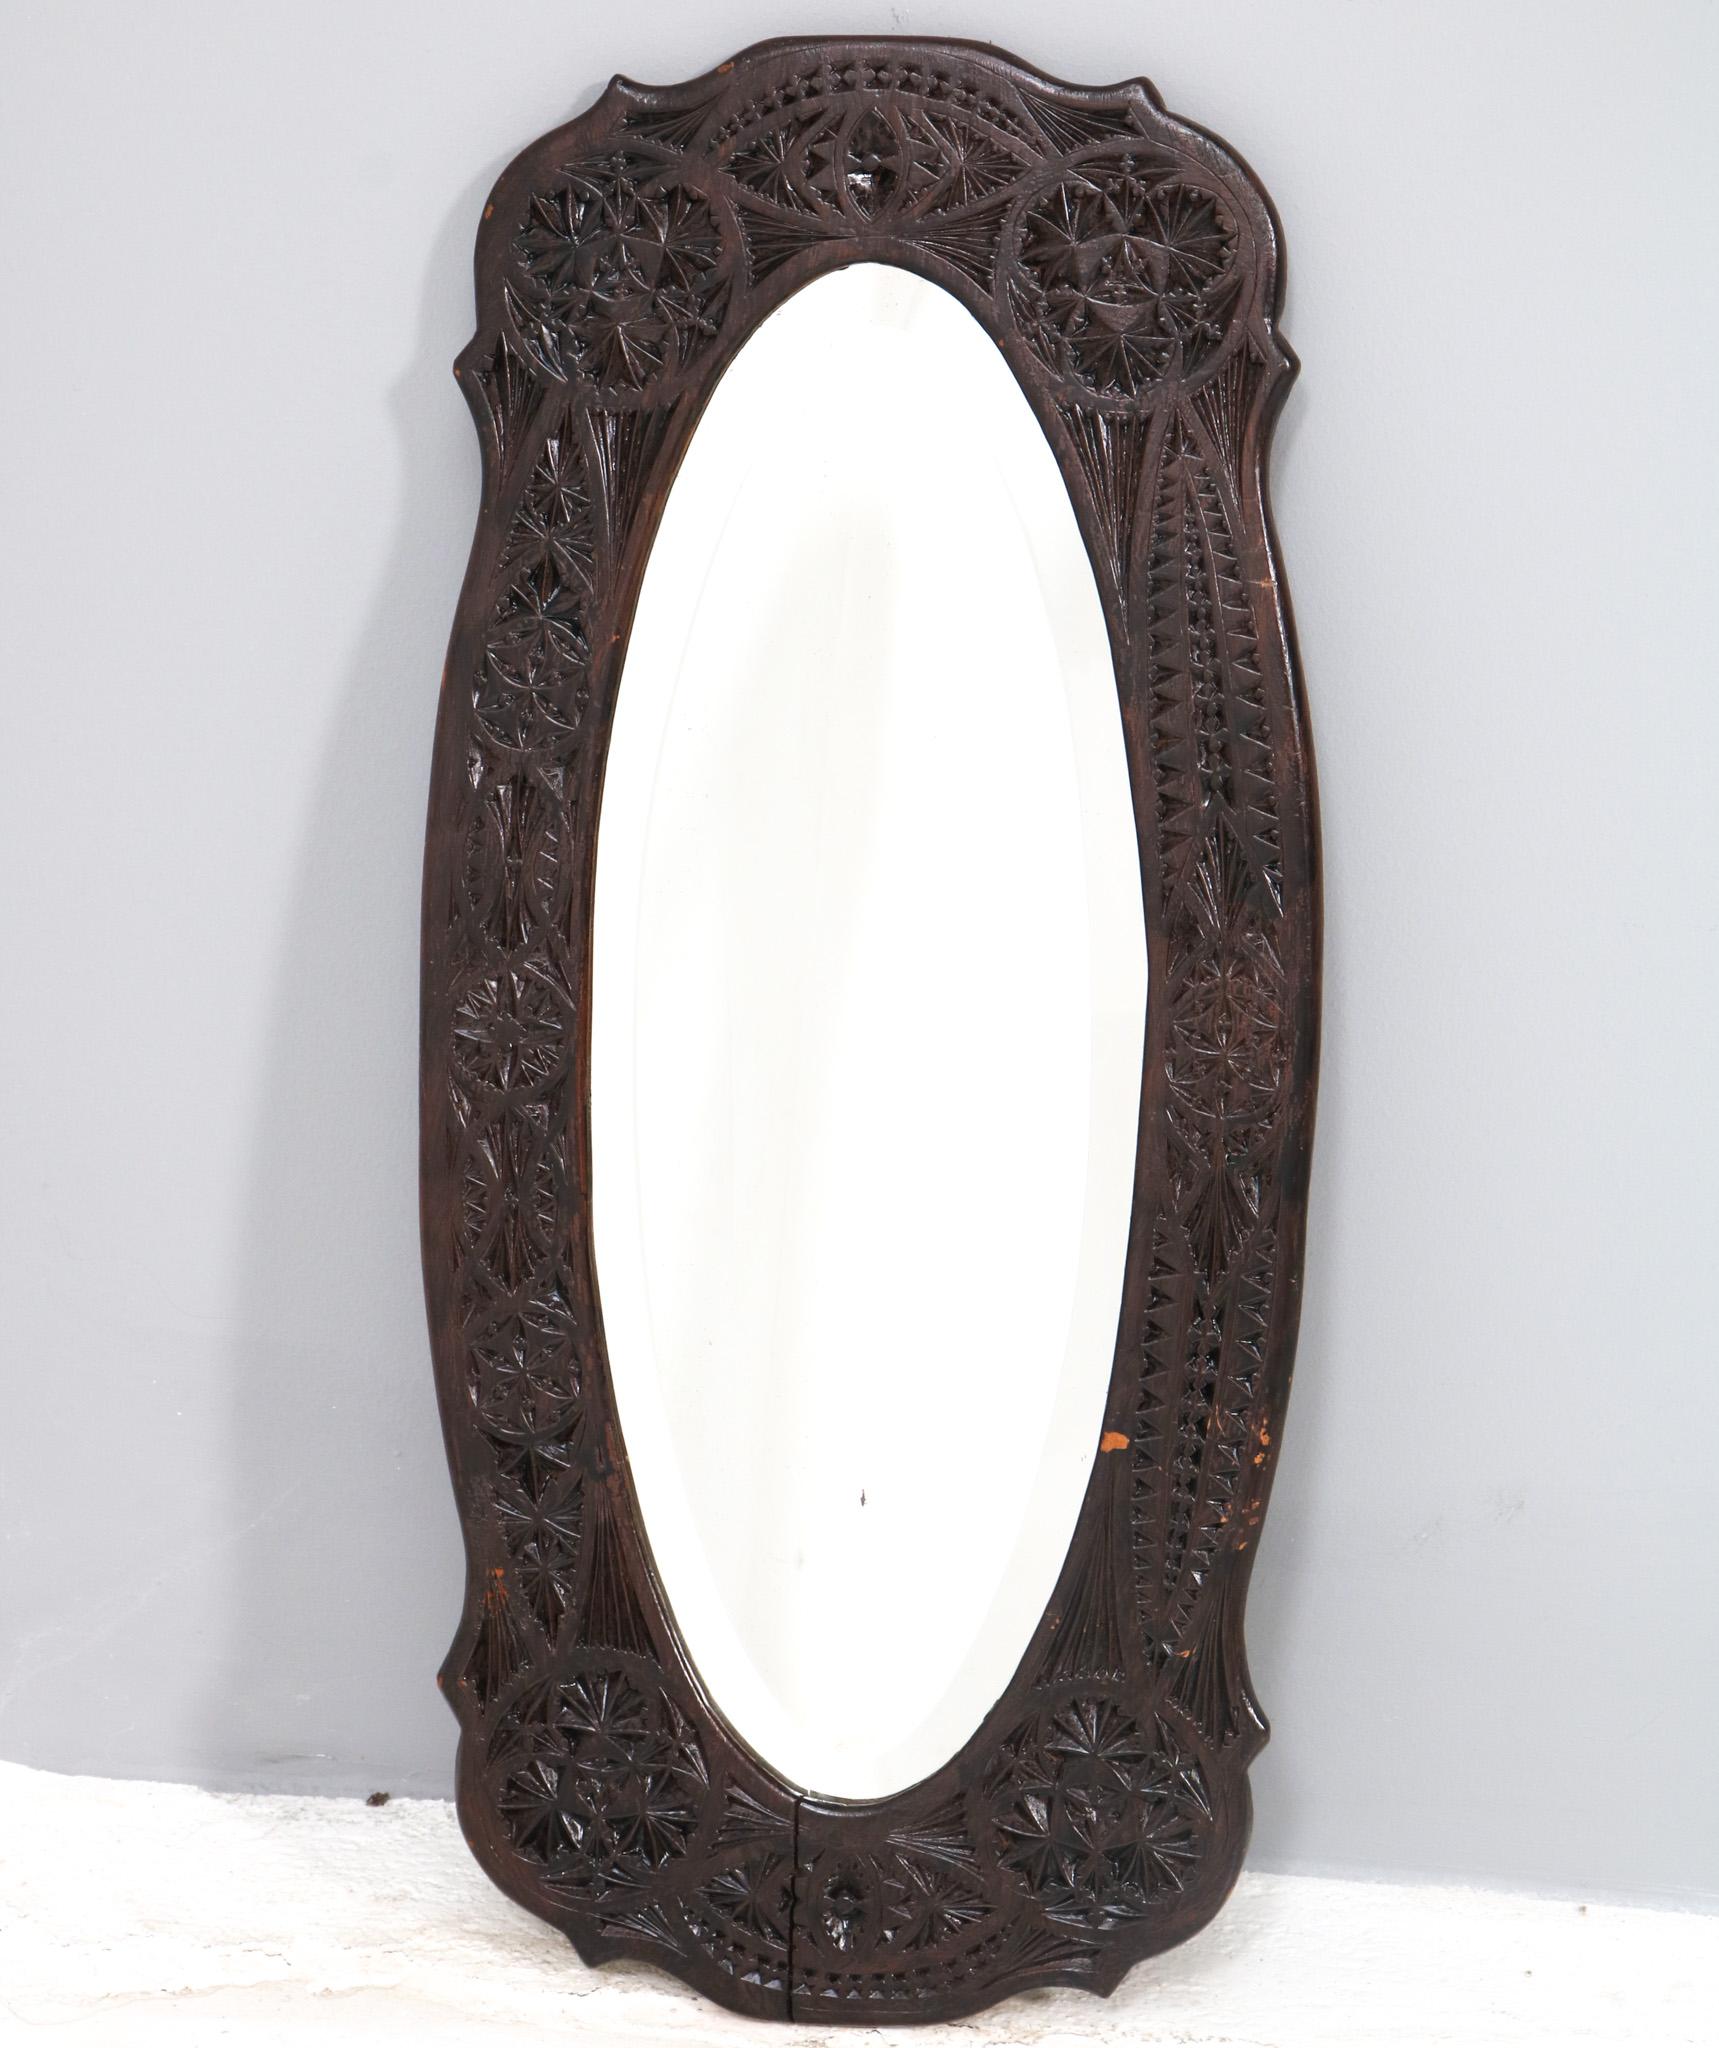 Stunning and rare Art Nouveau kerfschnitt wall mirror.
Striking Dutch design from the 1900s.
Original hand-carved walnut frame with original beveled mirror.
This wonderful Art Nouveau kerfschnitt wall mirror is in very good original condition with